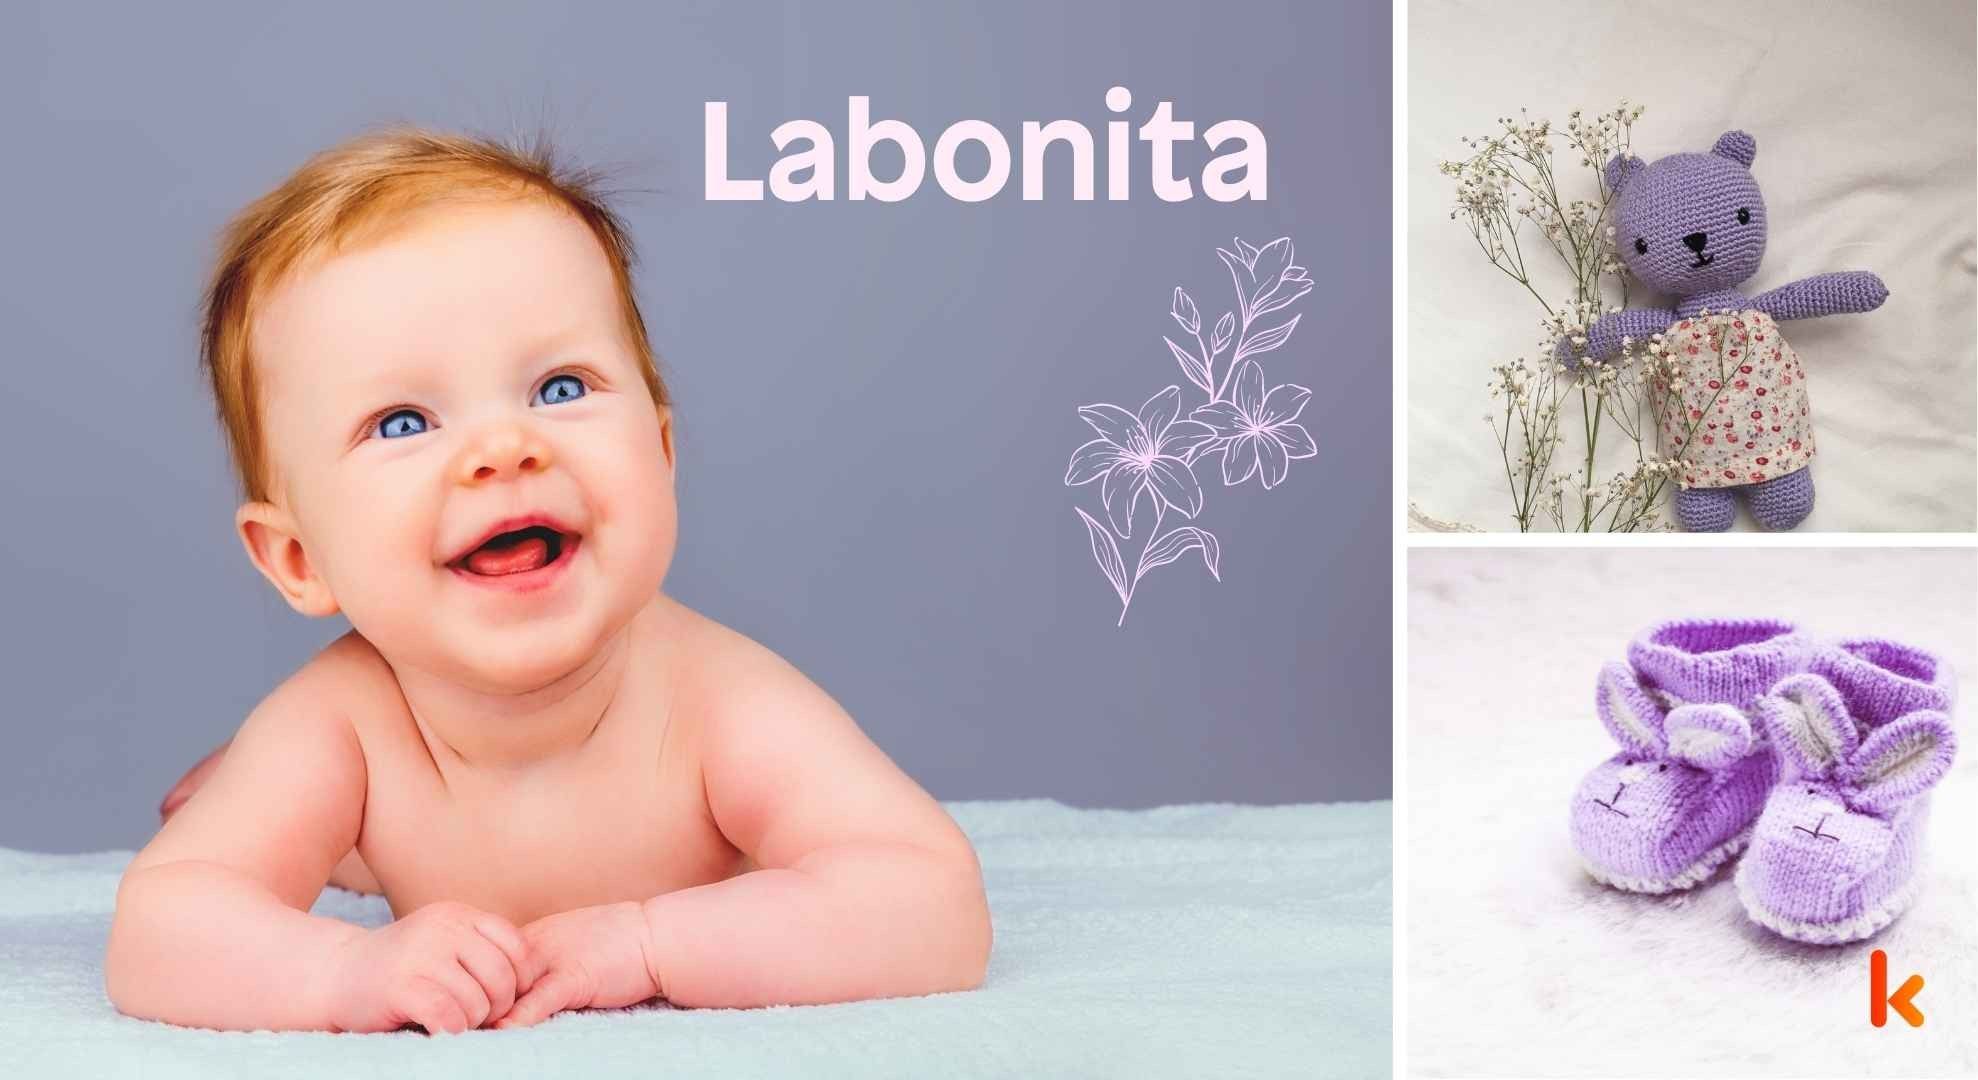 Meaning of the name Labonita